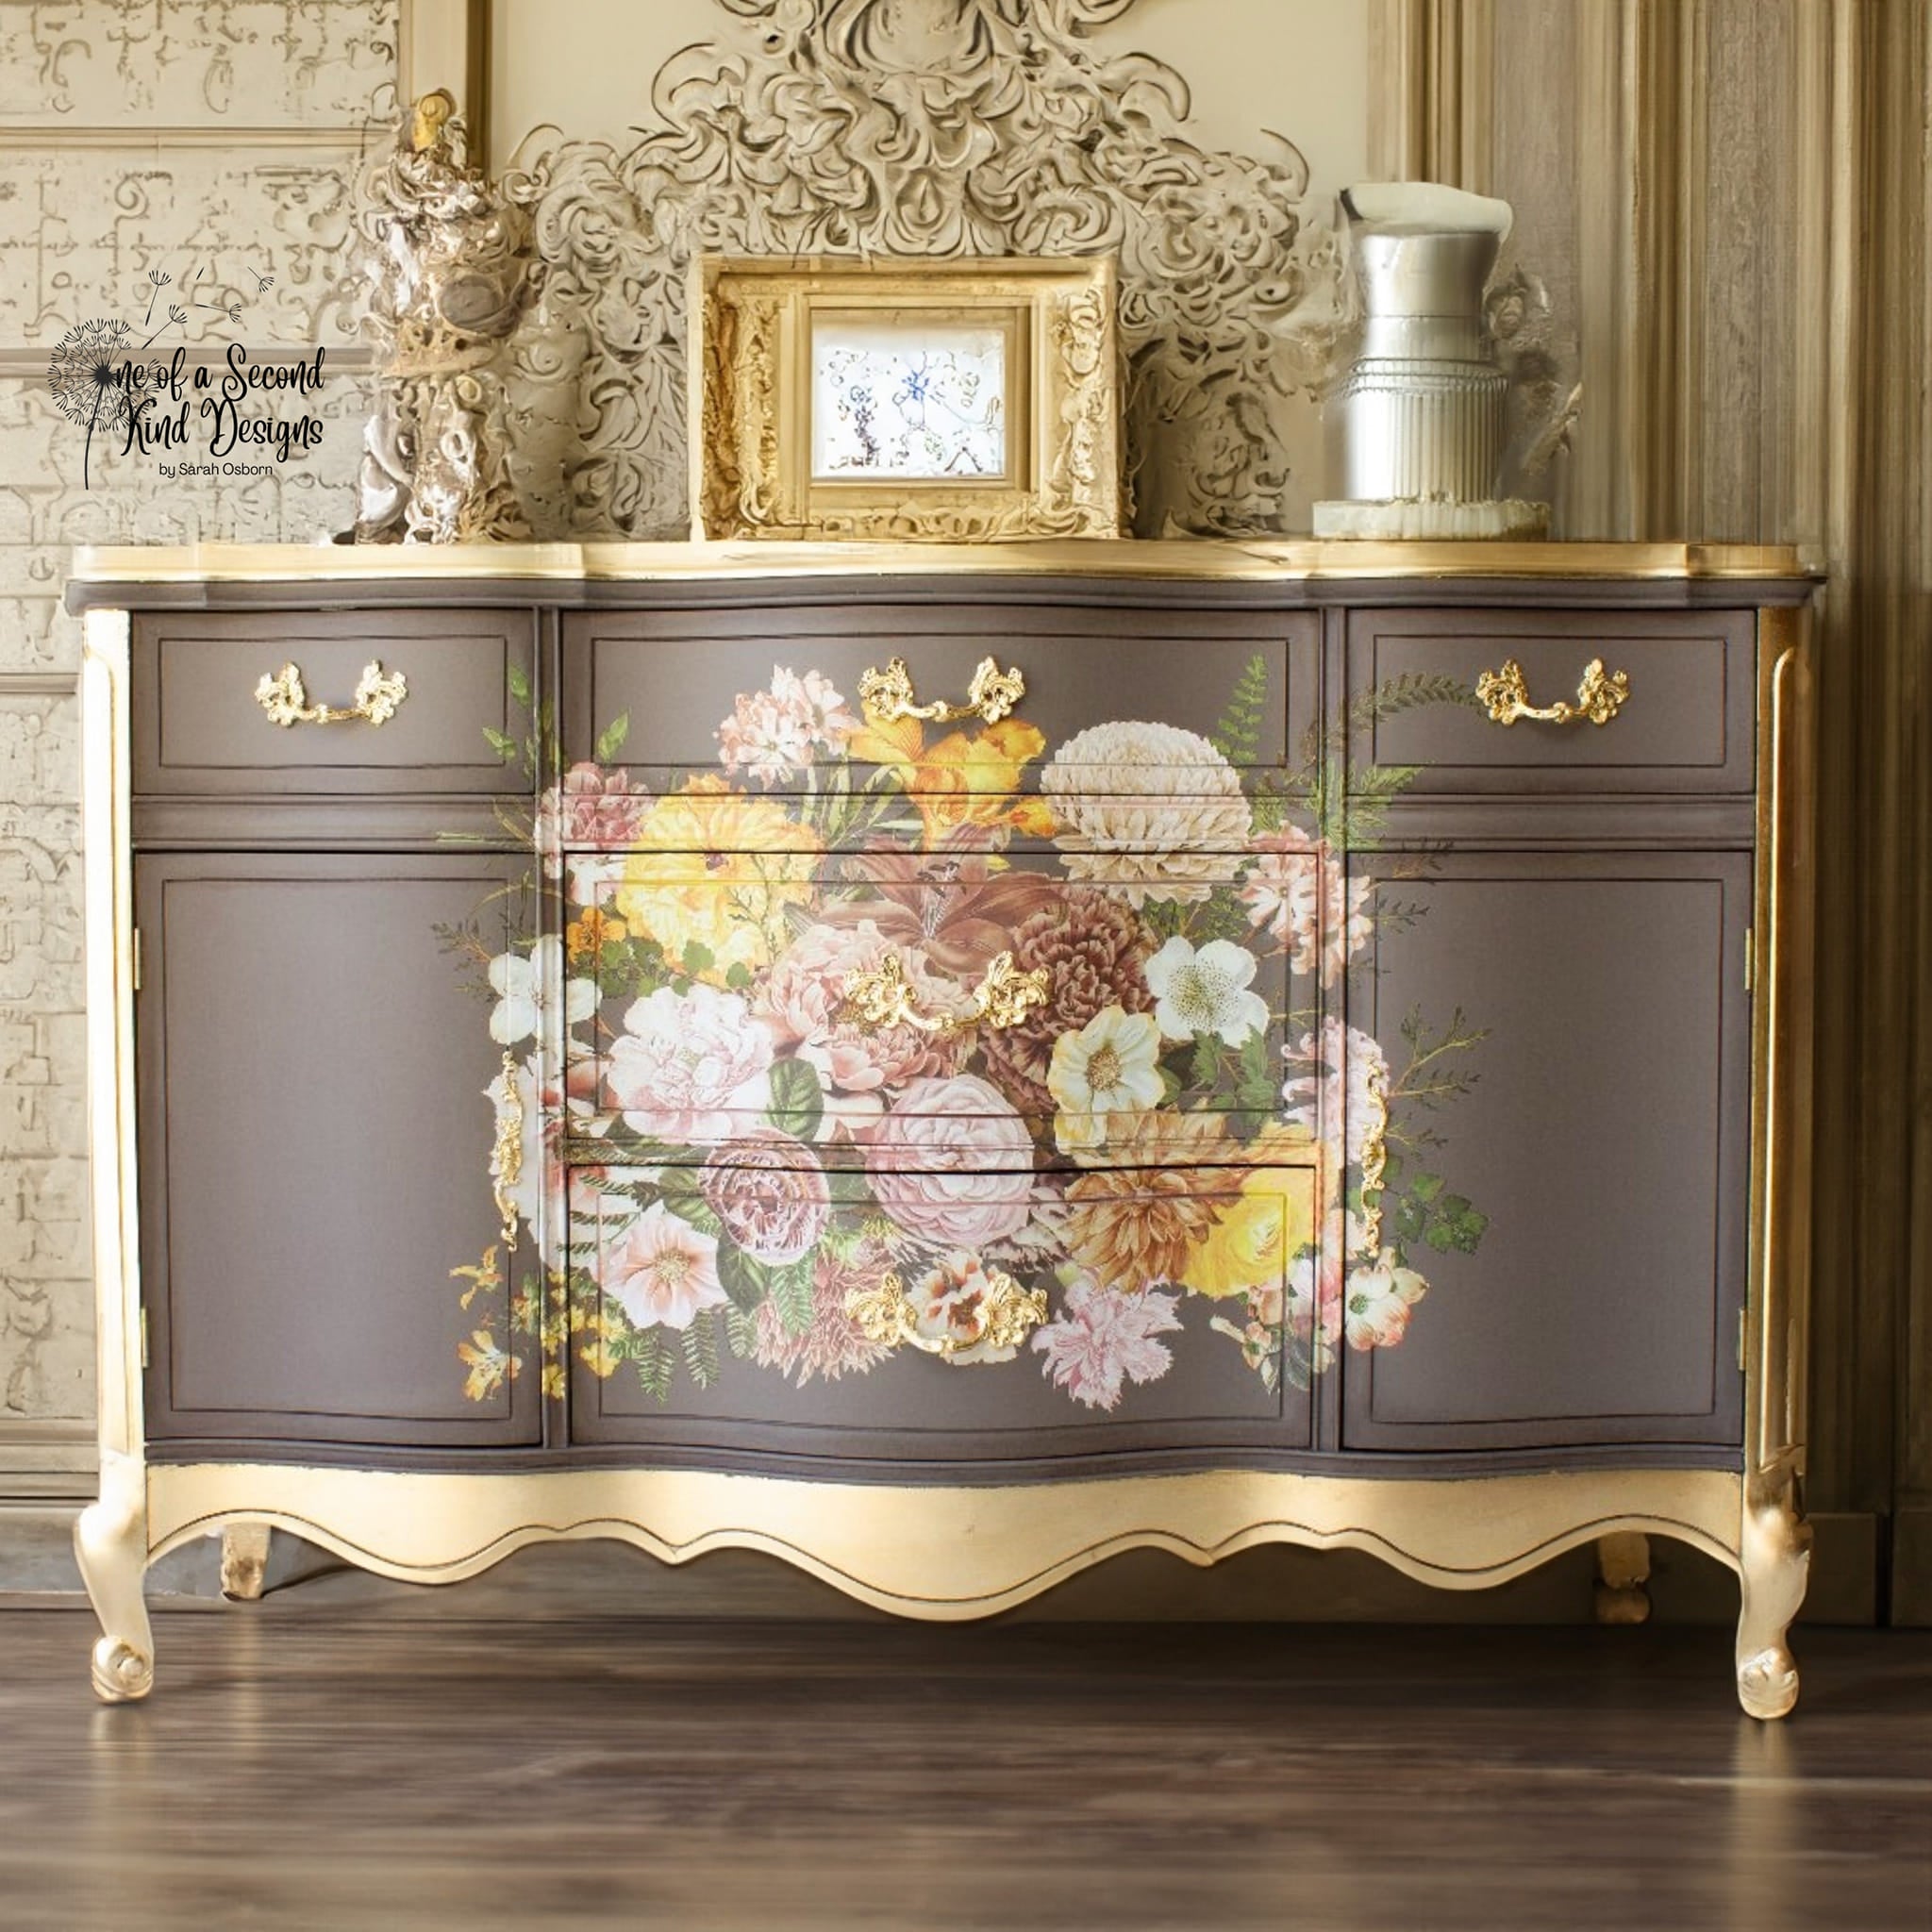 A vintage dresser with 5 drawers and 2 doors refurbished by One of a Second Kind Designs is painted a soft light brown with gold accents and features ReDesign with Prima's Kacha Woodland Floral transfer on the center of the center drawers.